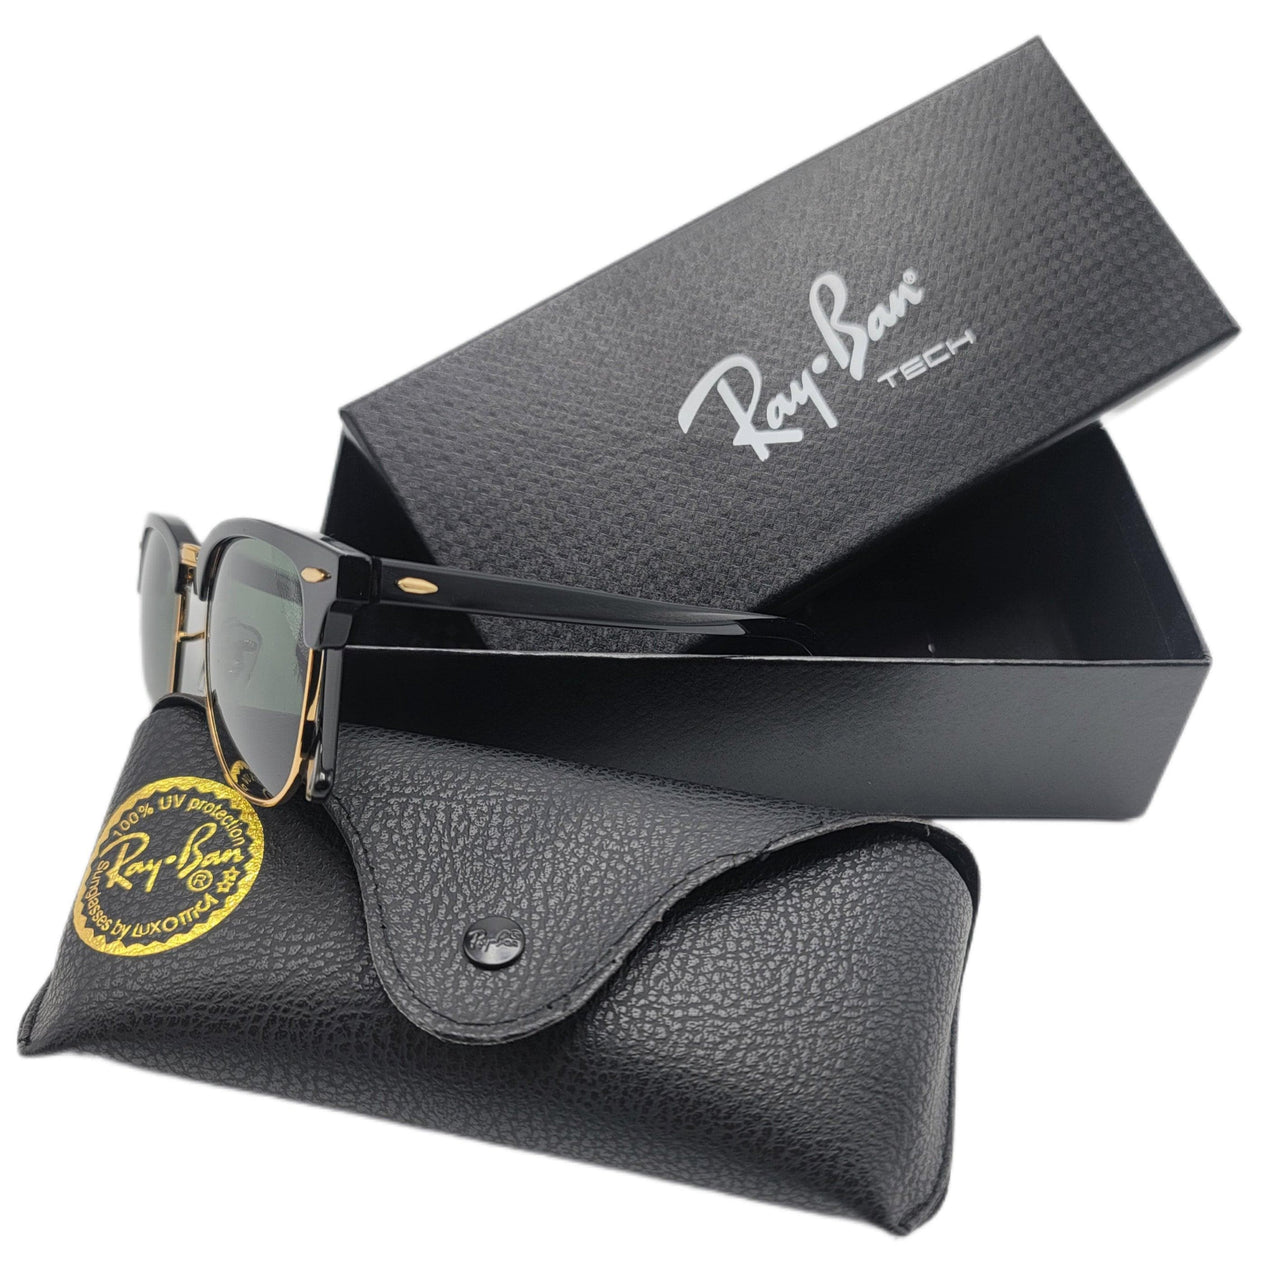 The Bag Couture Sunglasses Ray Ban Clubmaster Sunglasses GGR